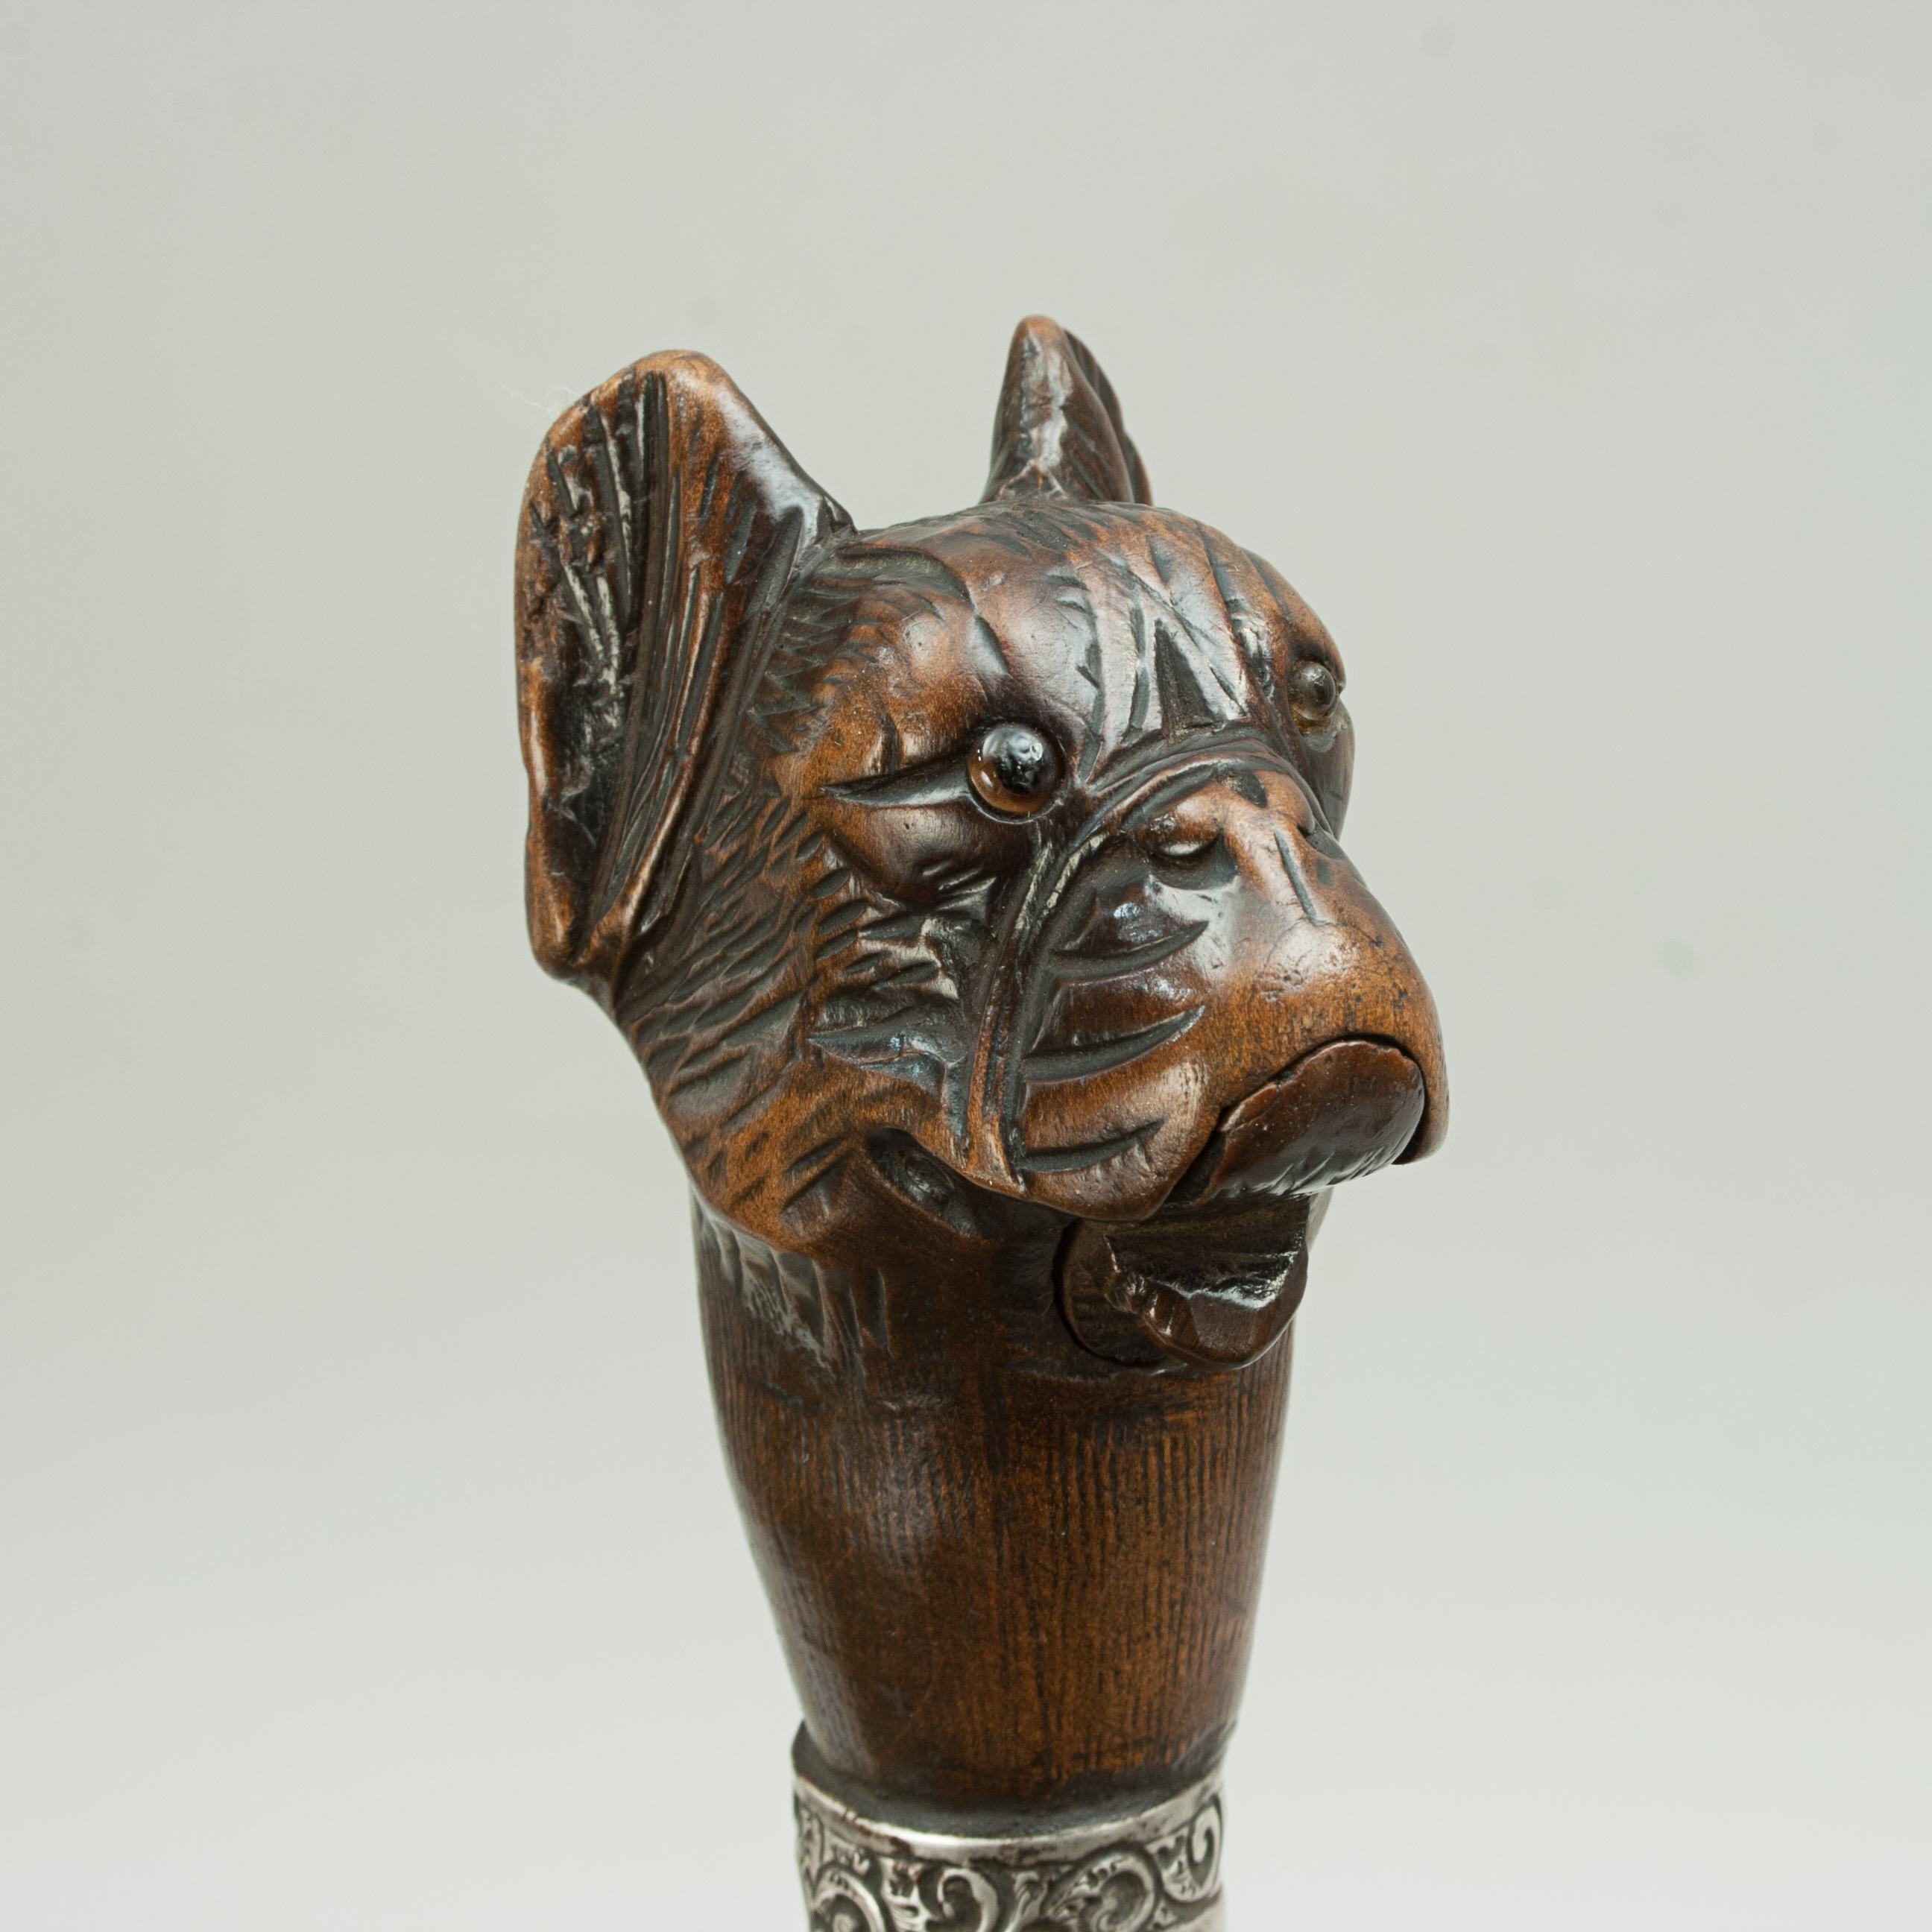 Bull dog head walking cane.
Early 20th century walking stick with an automaton dog head. The handle is a carved bulldog head, finely detailed, having inset amber glass eyes and spring-loaded opening mouth. The bull dog head mounted on Malacca cane